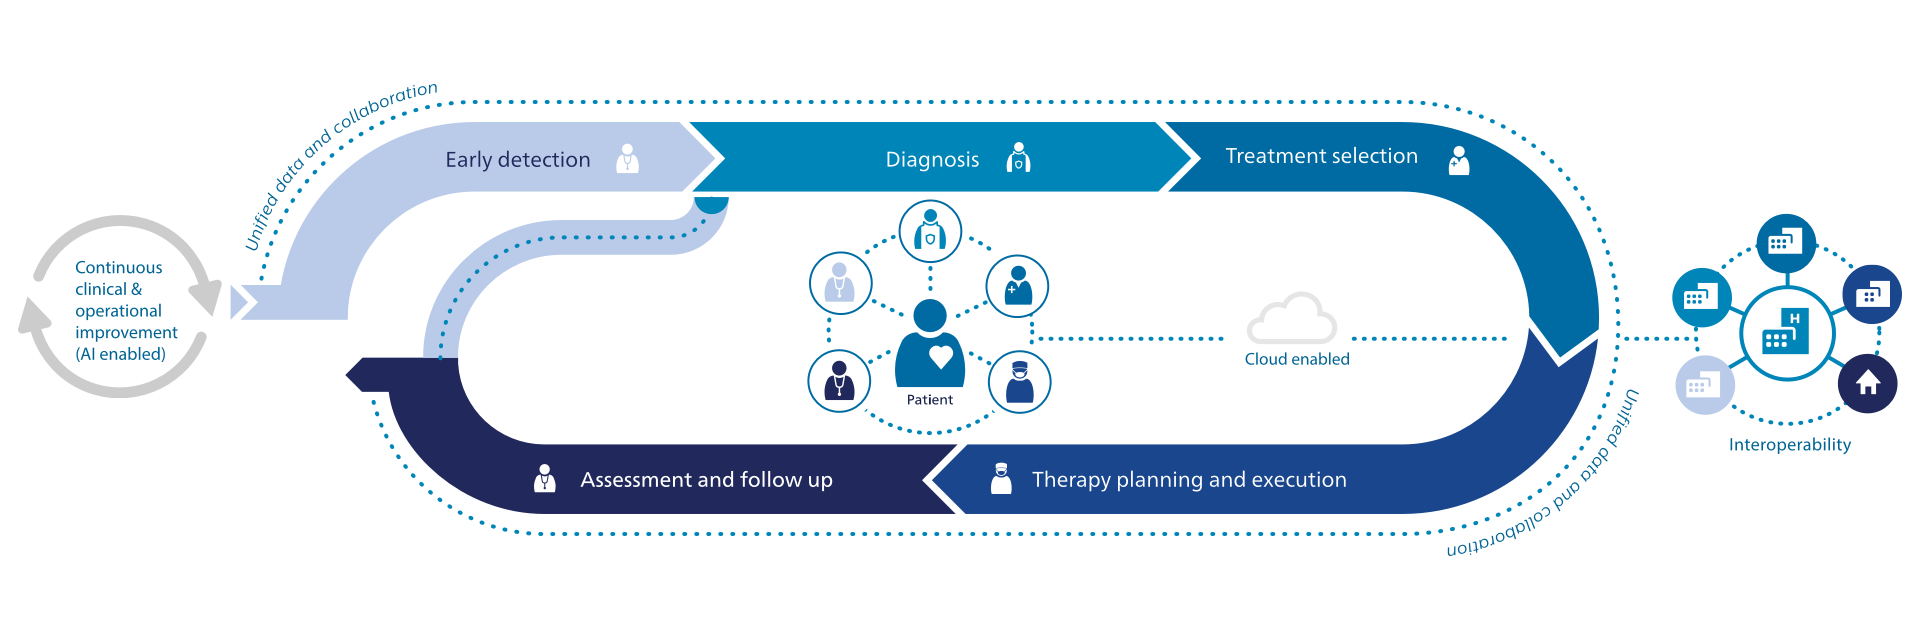 Graphic showing the cancer patient journey, including detection, diagnosis, treatment selection, therapy and follow-up.